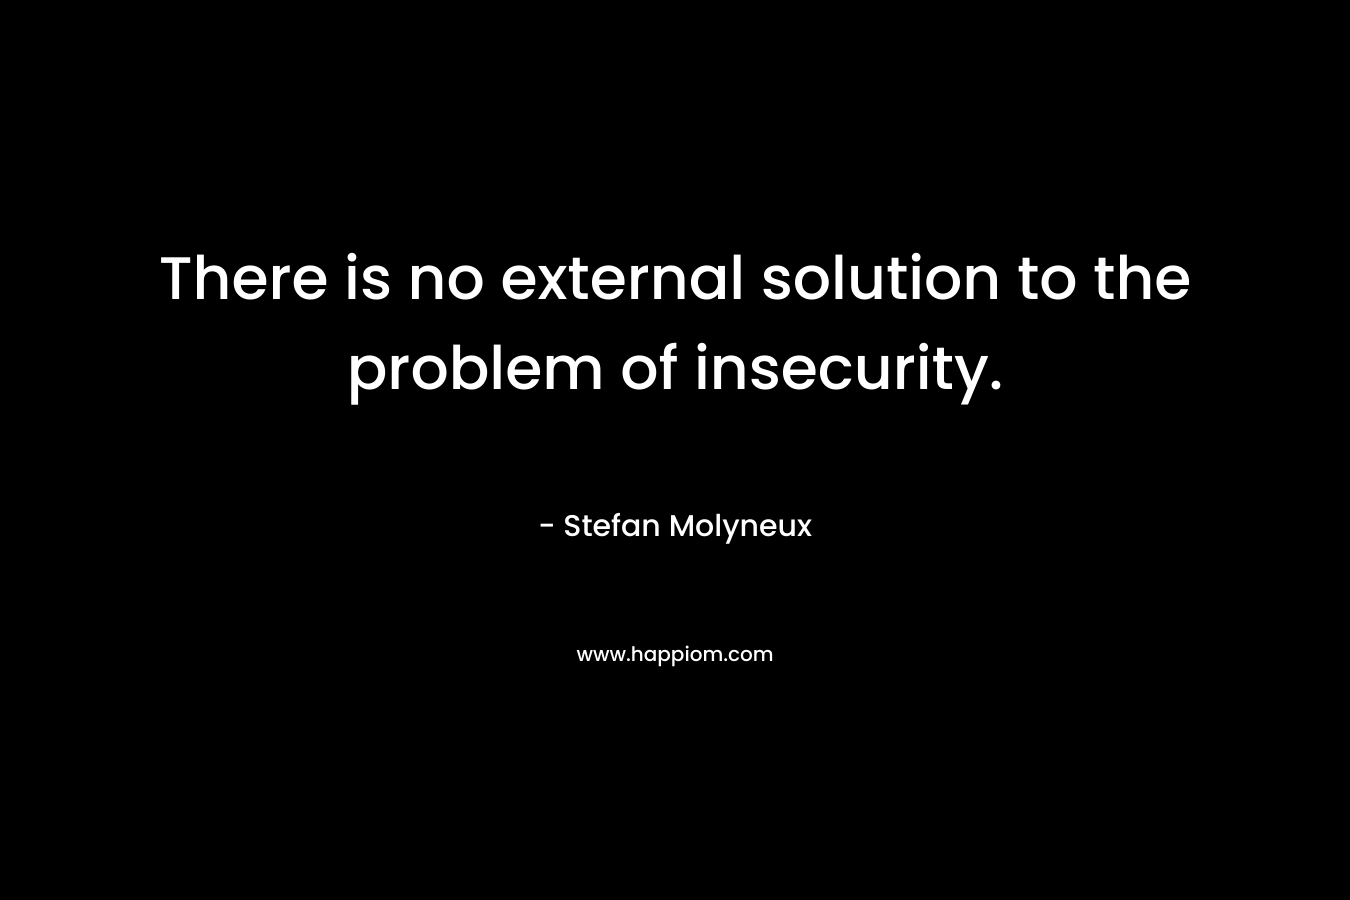 There is no external solution to the problem of insecurity.